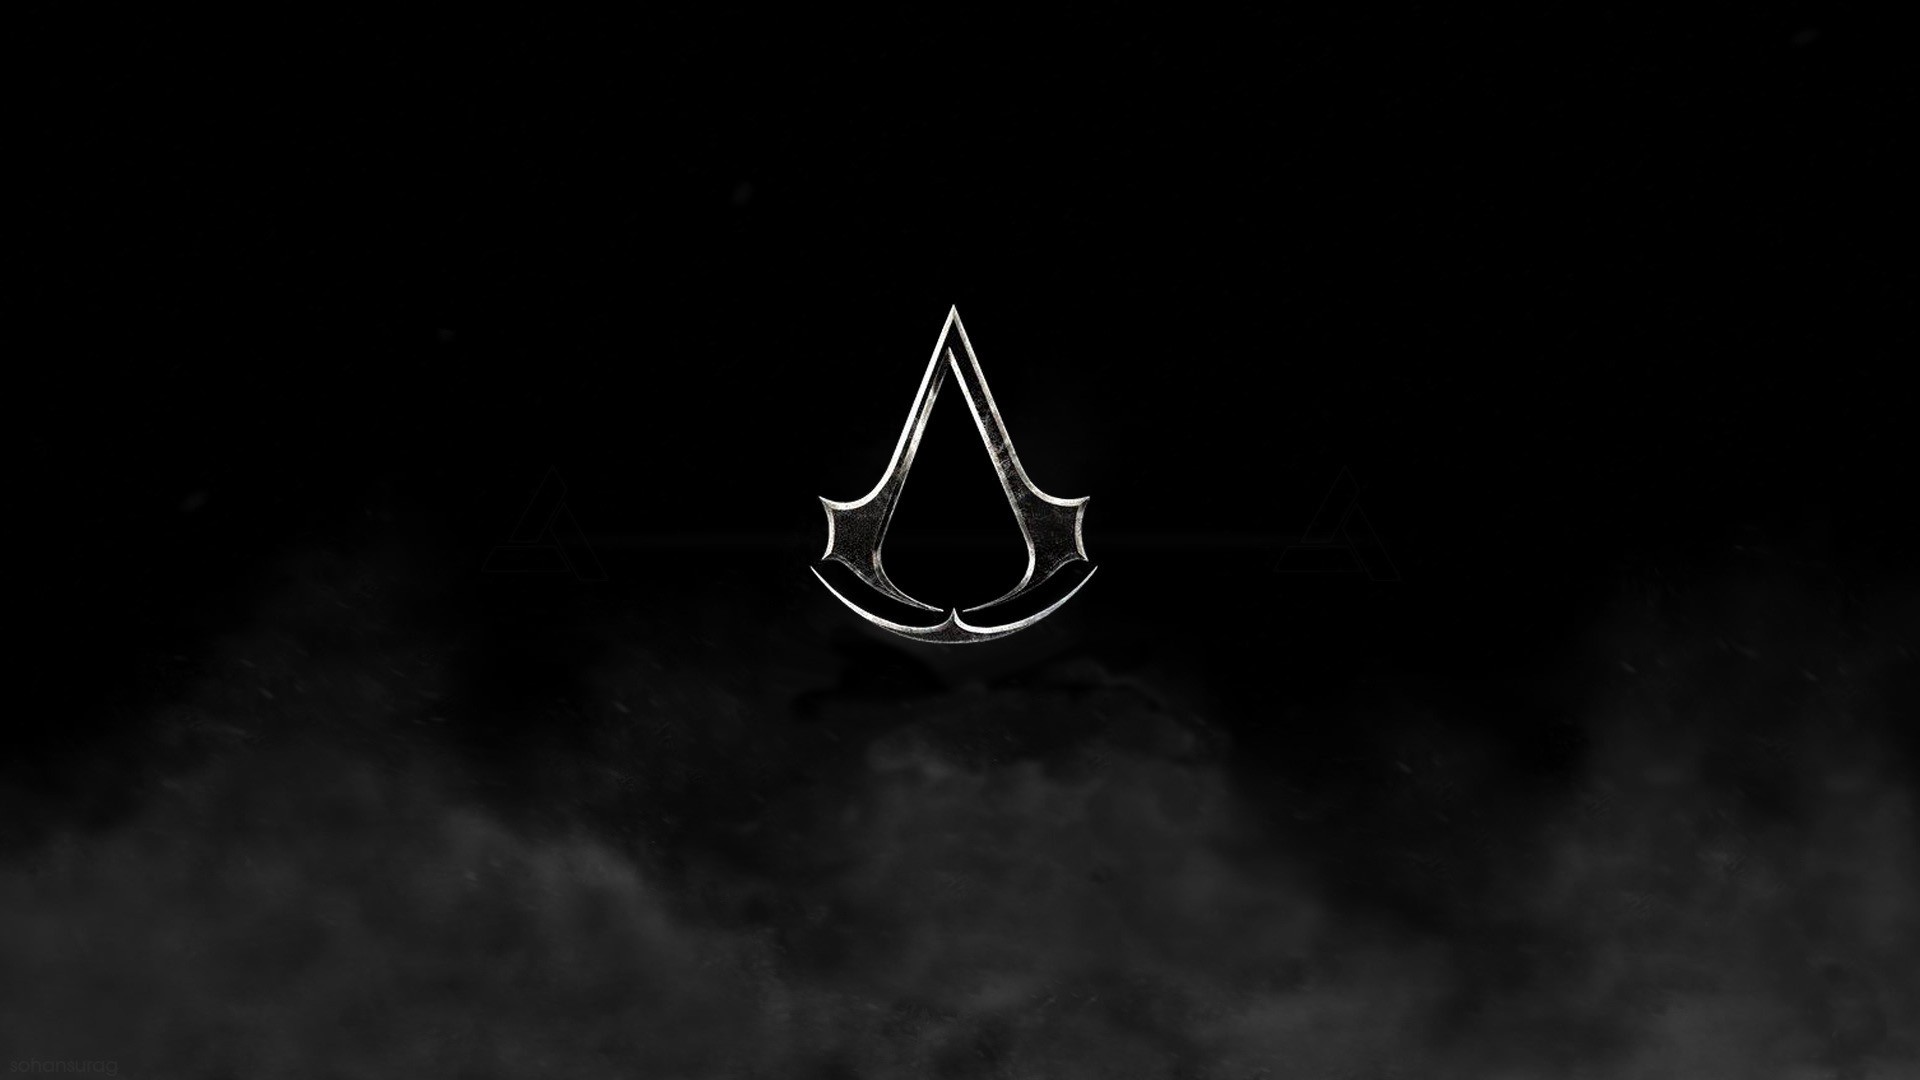 General 1920x1080 video games logo monochrome Assassin's Creed simple background PC gaming